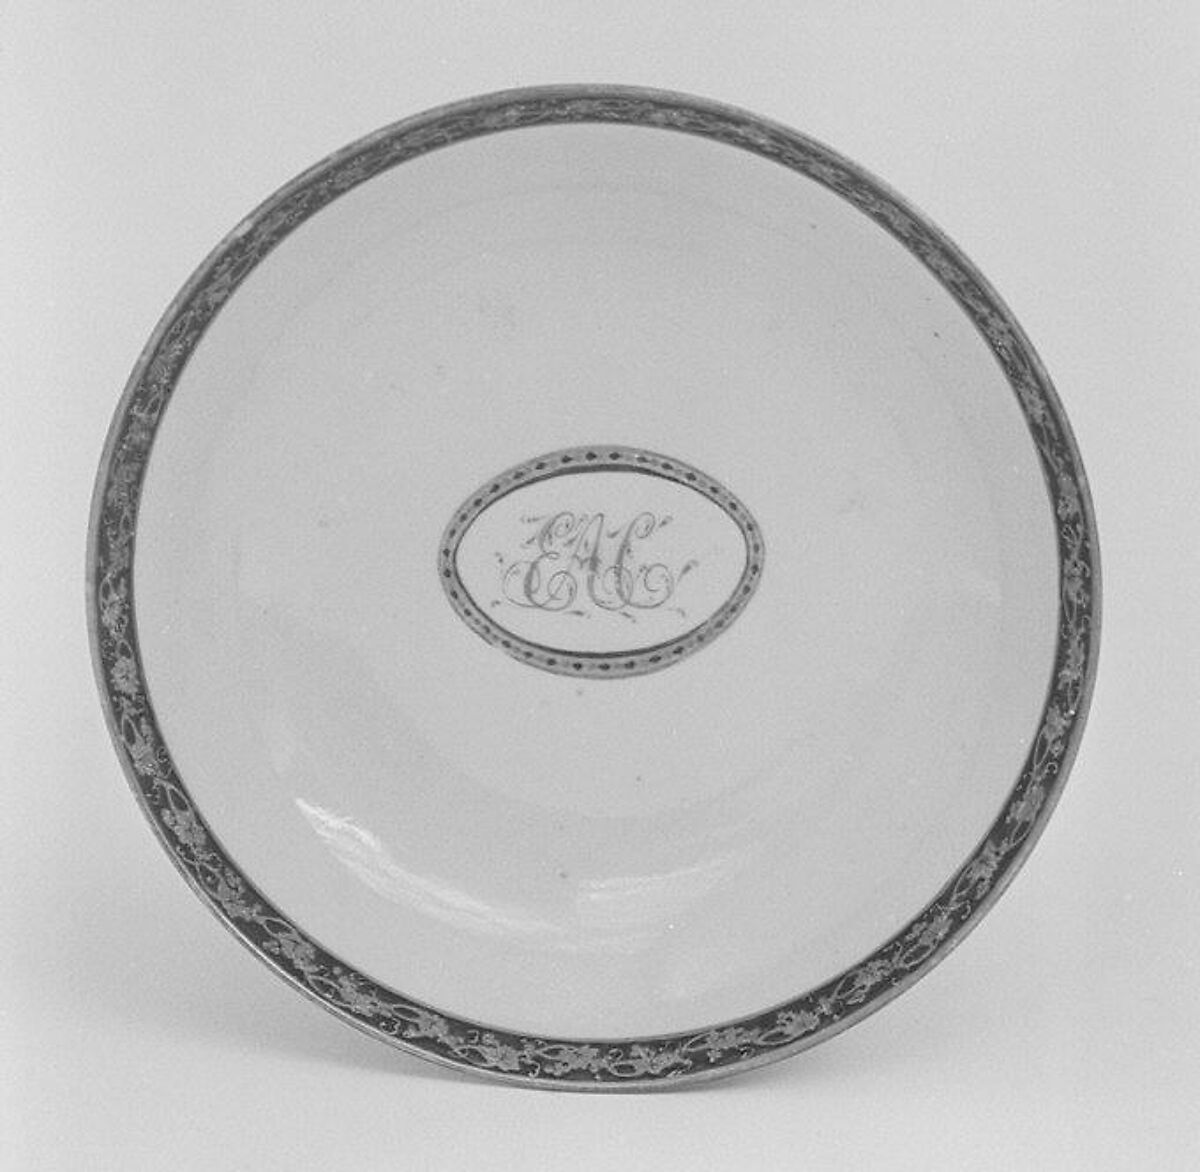 Saucer (part of a service), Hard-paste porcelain, Chinese, probably for British market 